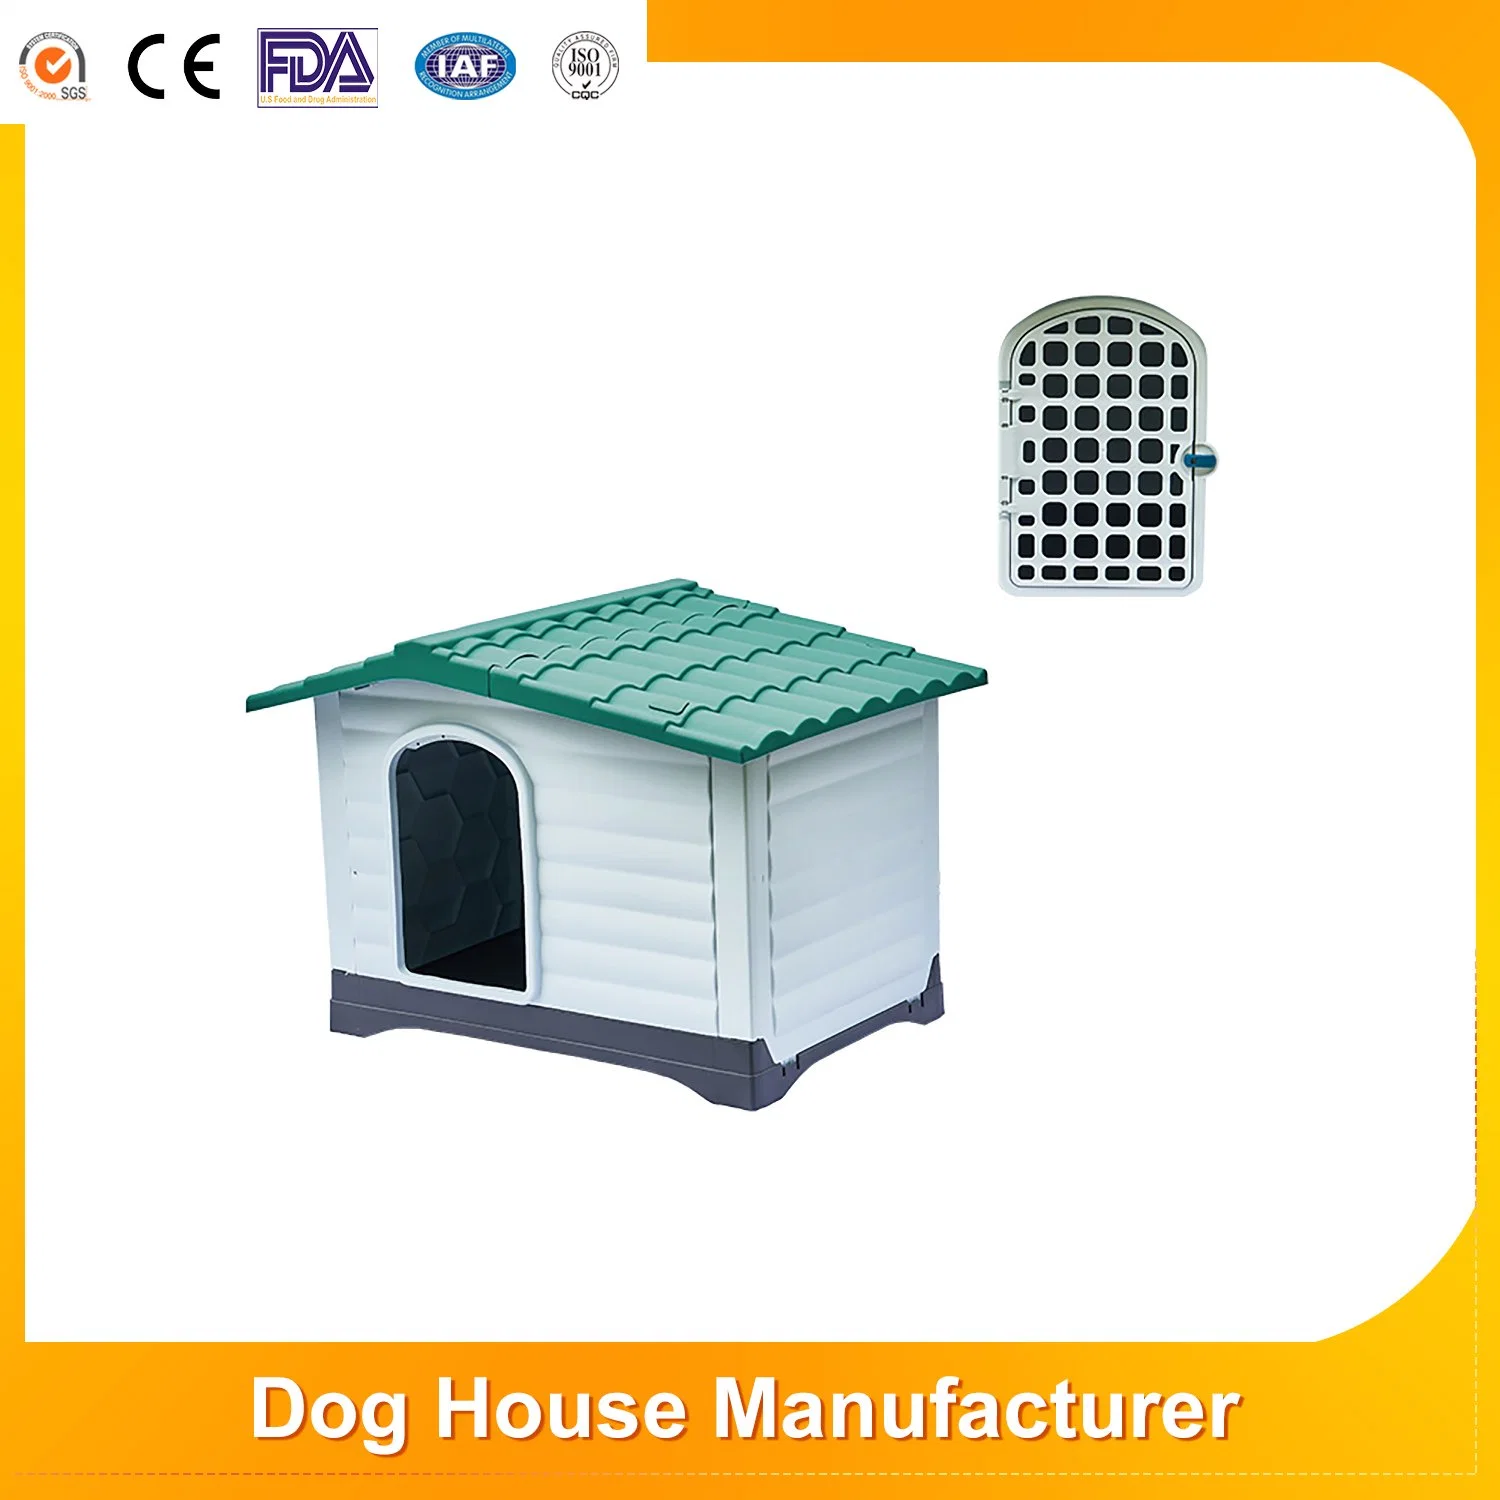 Waterproof Ventilate Pet Kennel All-Season Availability Indoor/Outdoor Plastic Pet Dog Houses for Sale